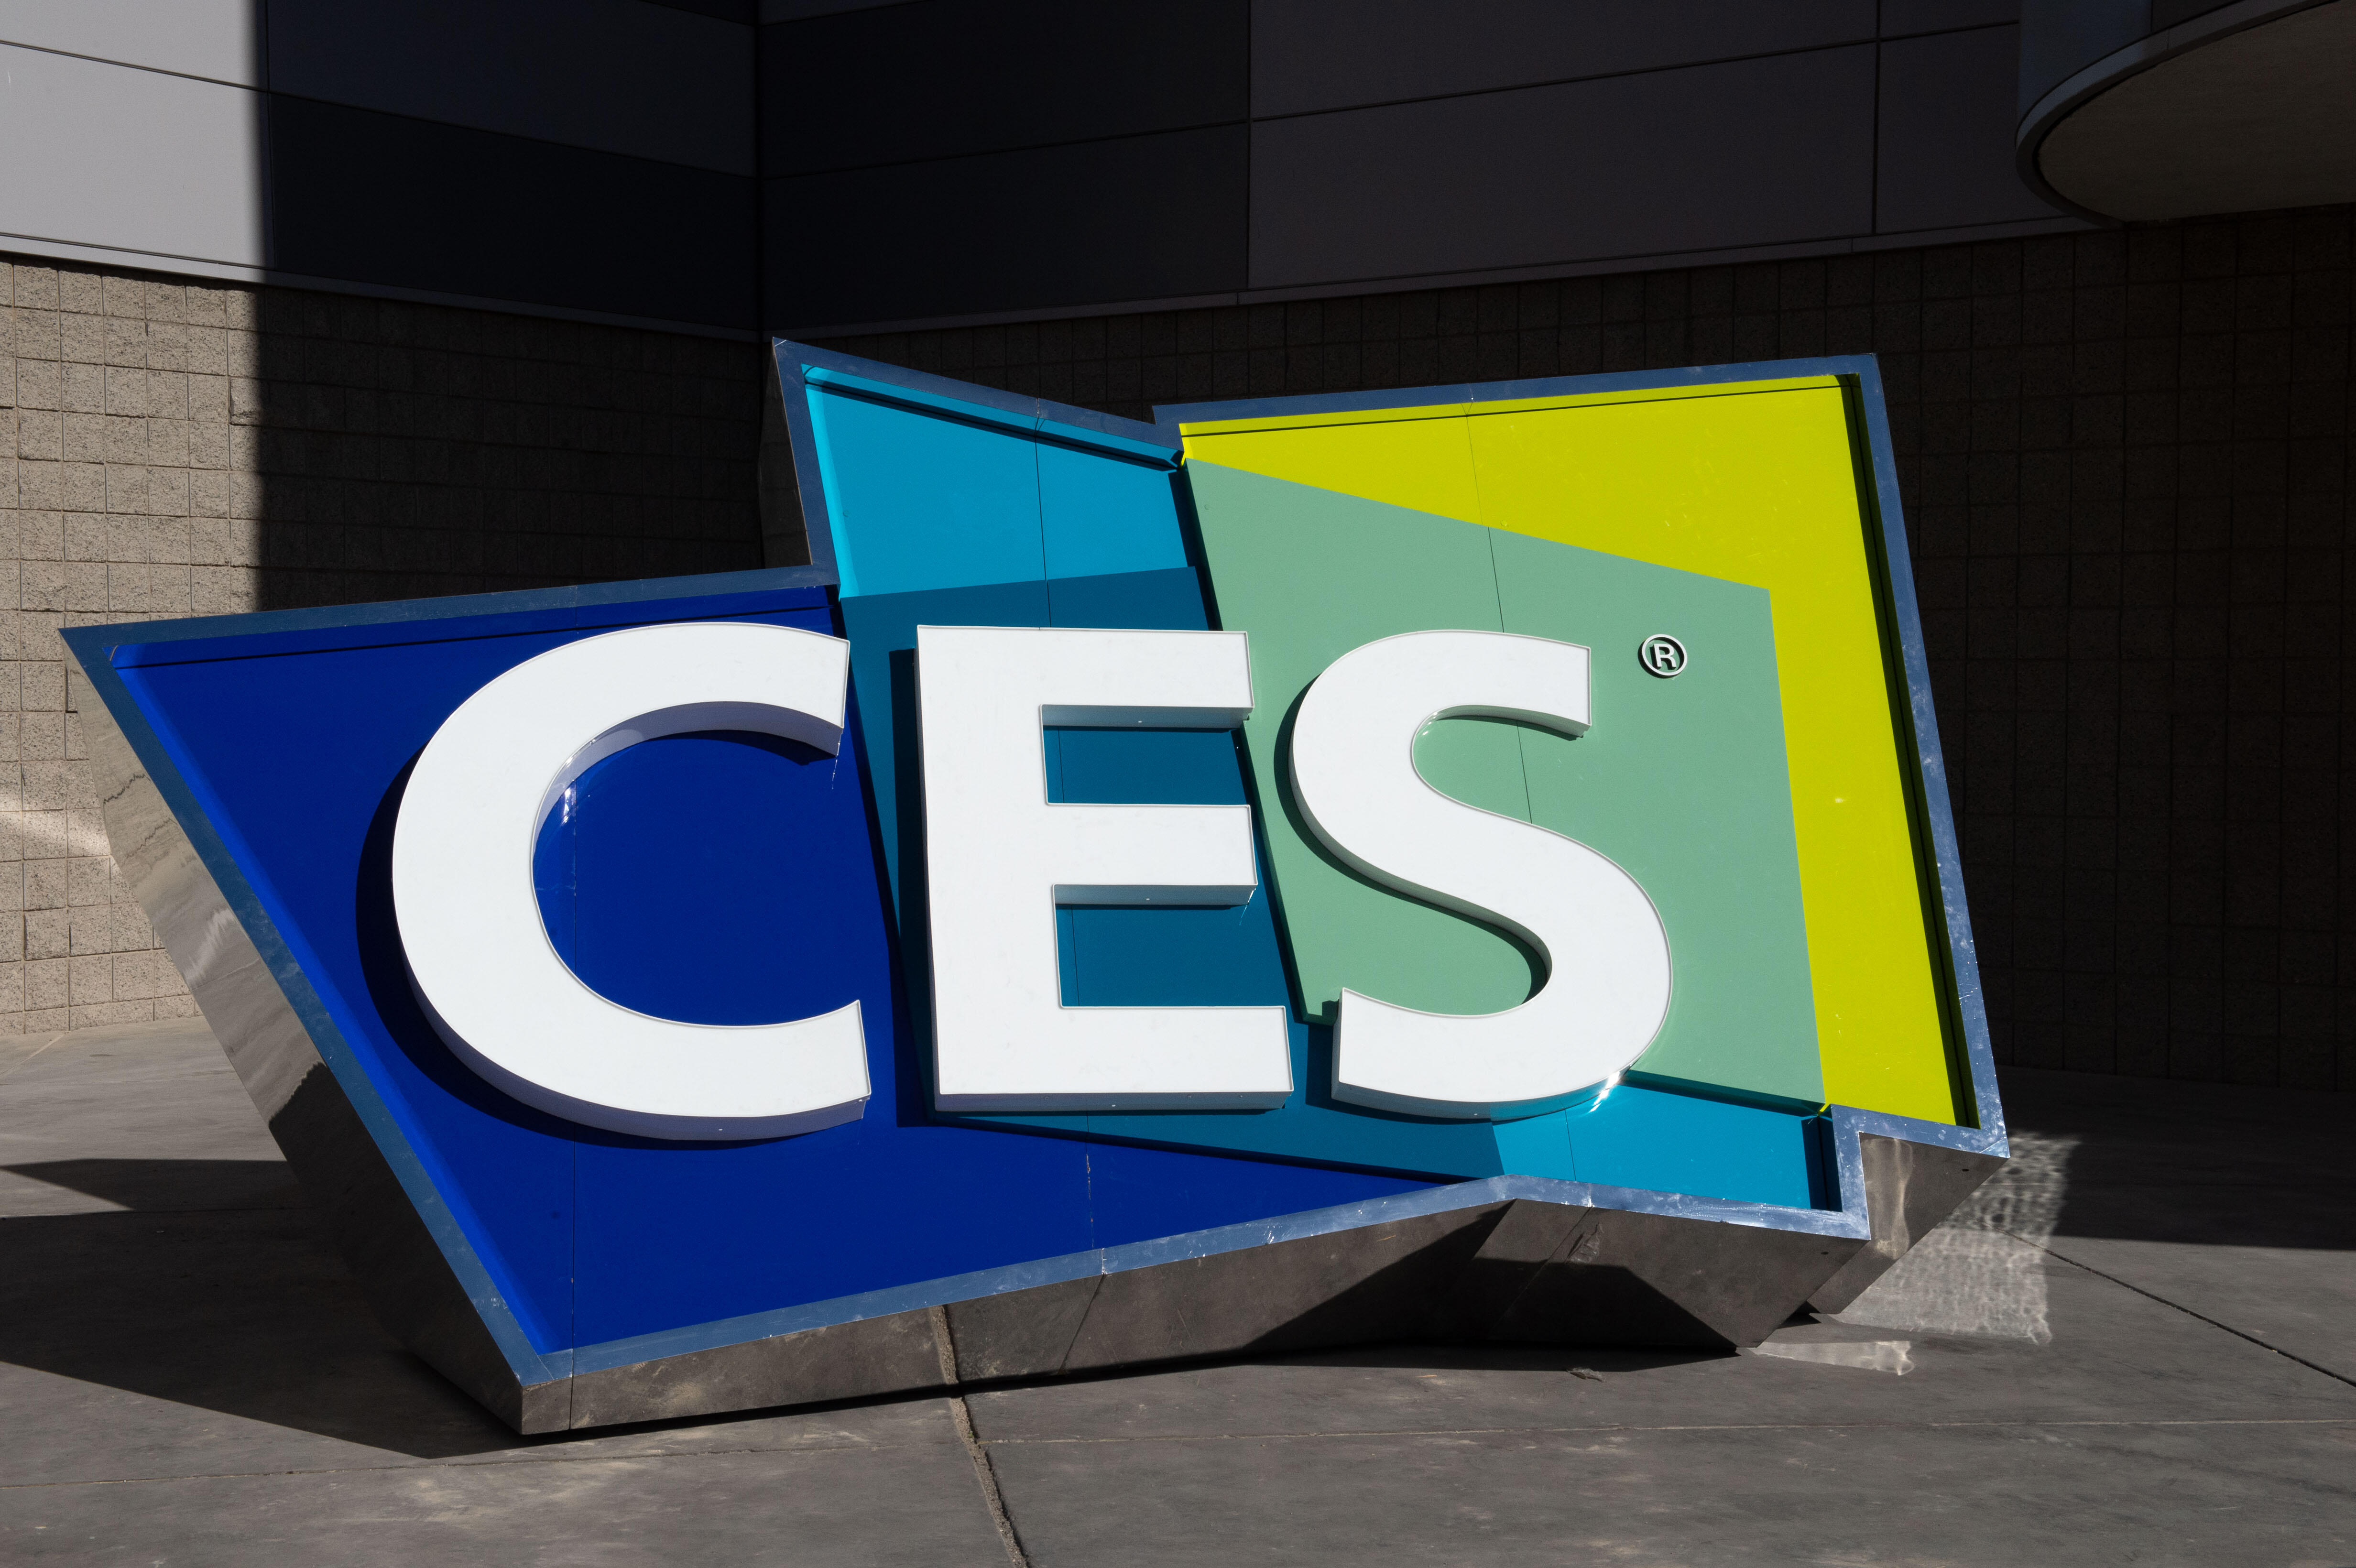 Check Out Some of the Amazing Tech Previewed at CES